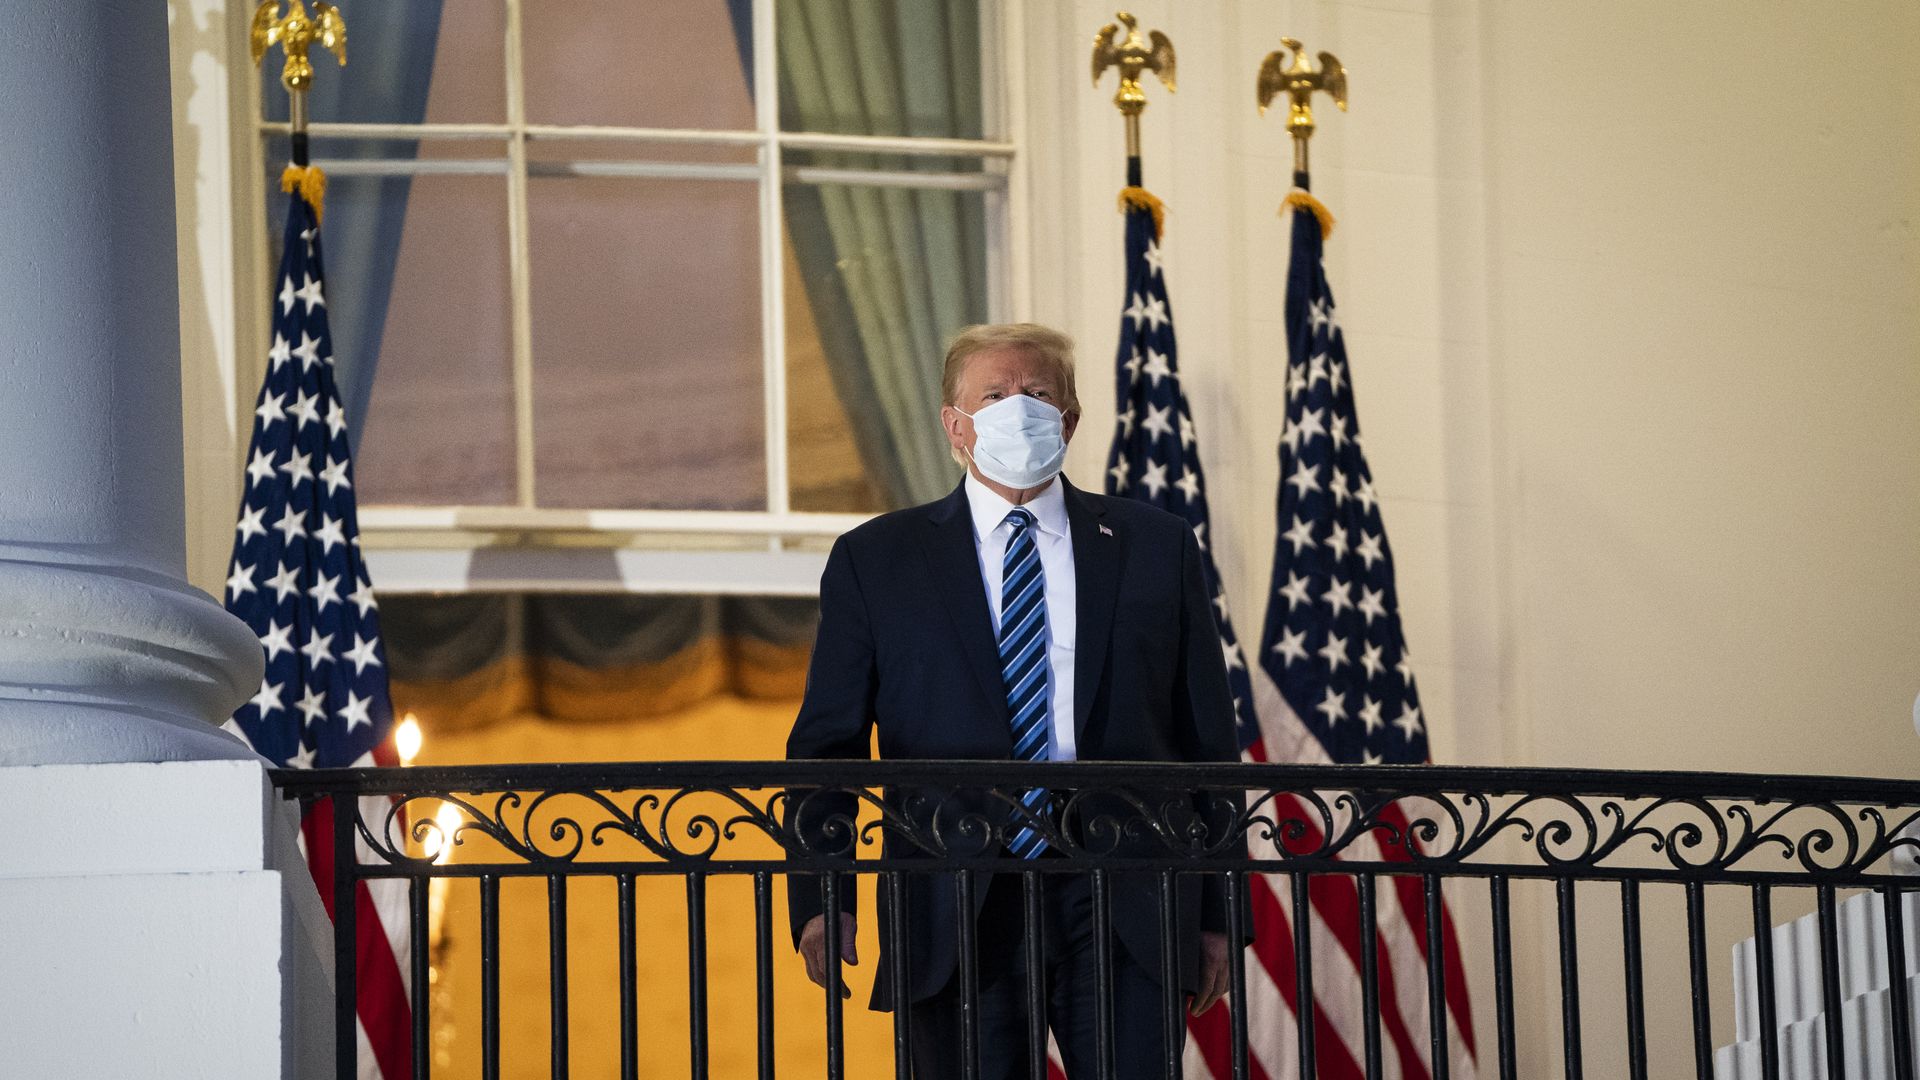 Trump wears a face mask at the White House